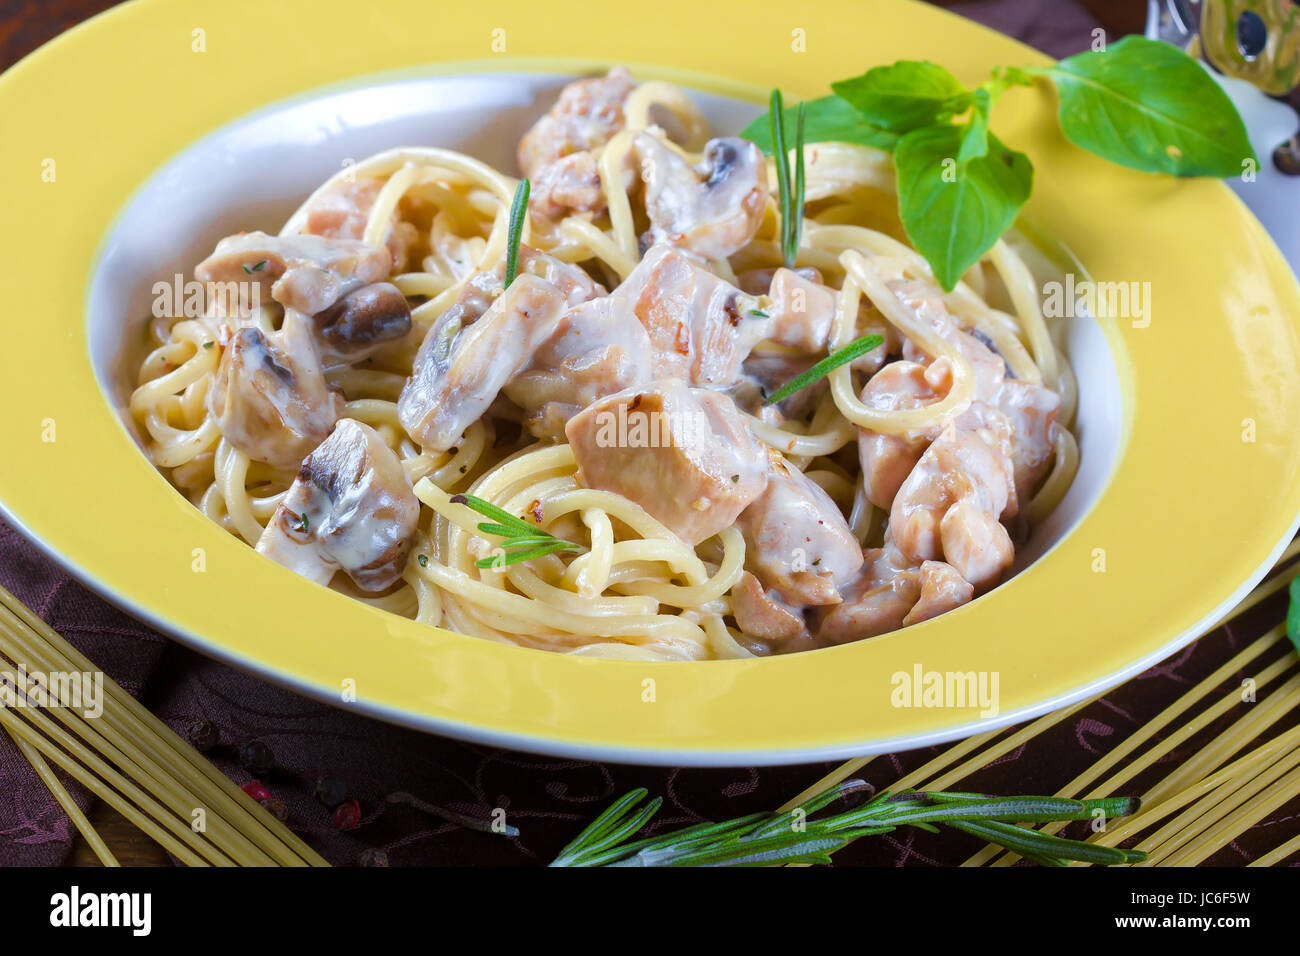 Italian pasta with sauce, beef and mushrooms, served on a plate Stock Photo